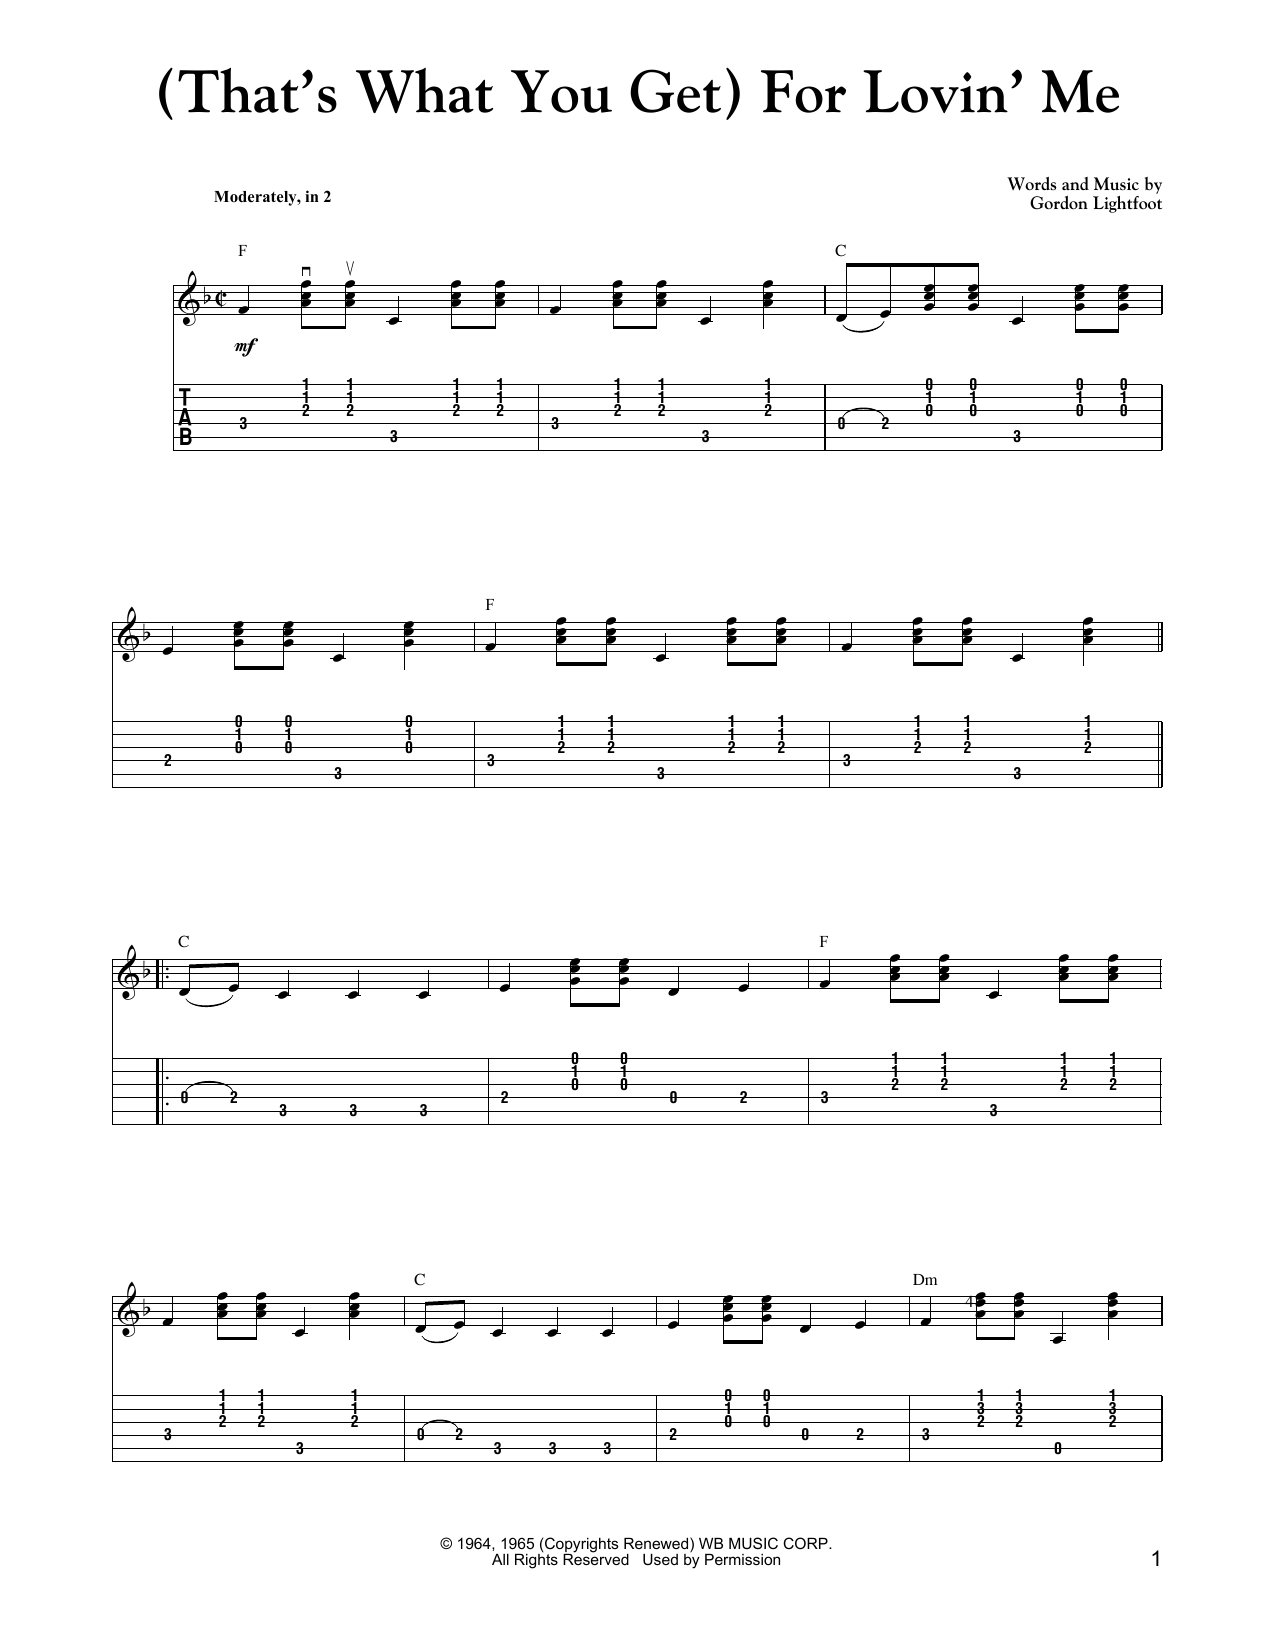 Download Peter, Paul & Mary (That's What You Get) For Lovin' Me Sheet Music